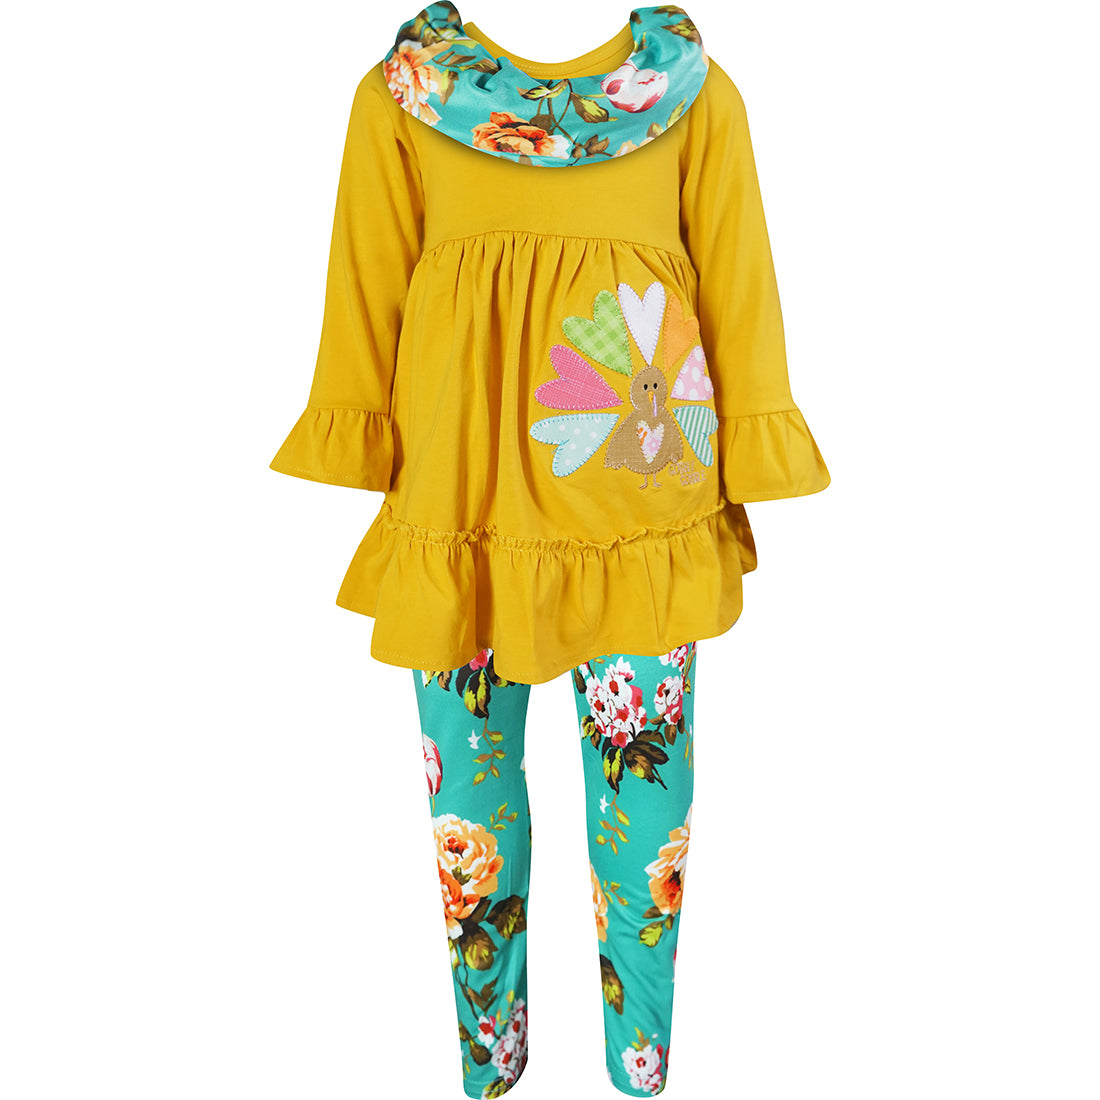 Baby Toddler Little Girls Thanksgiving Turkey Scarf Outfit - Mustard/Turquoise - Angeline Kids